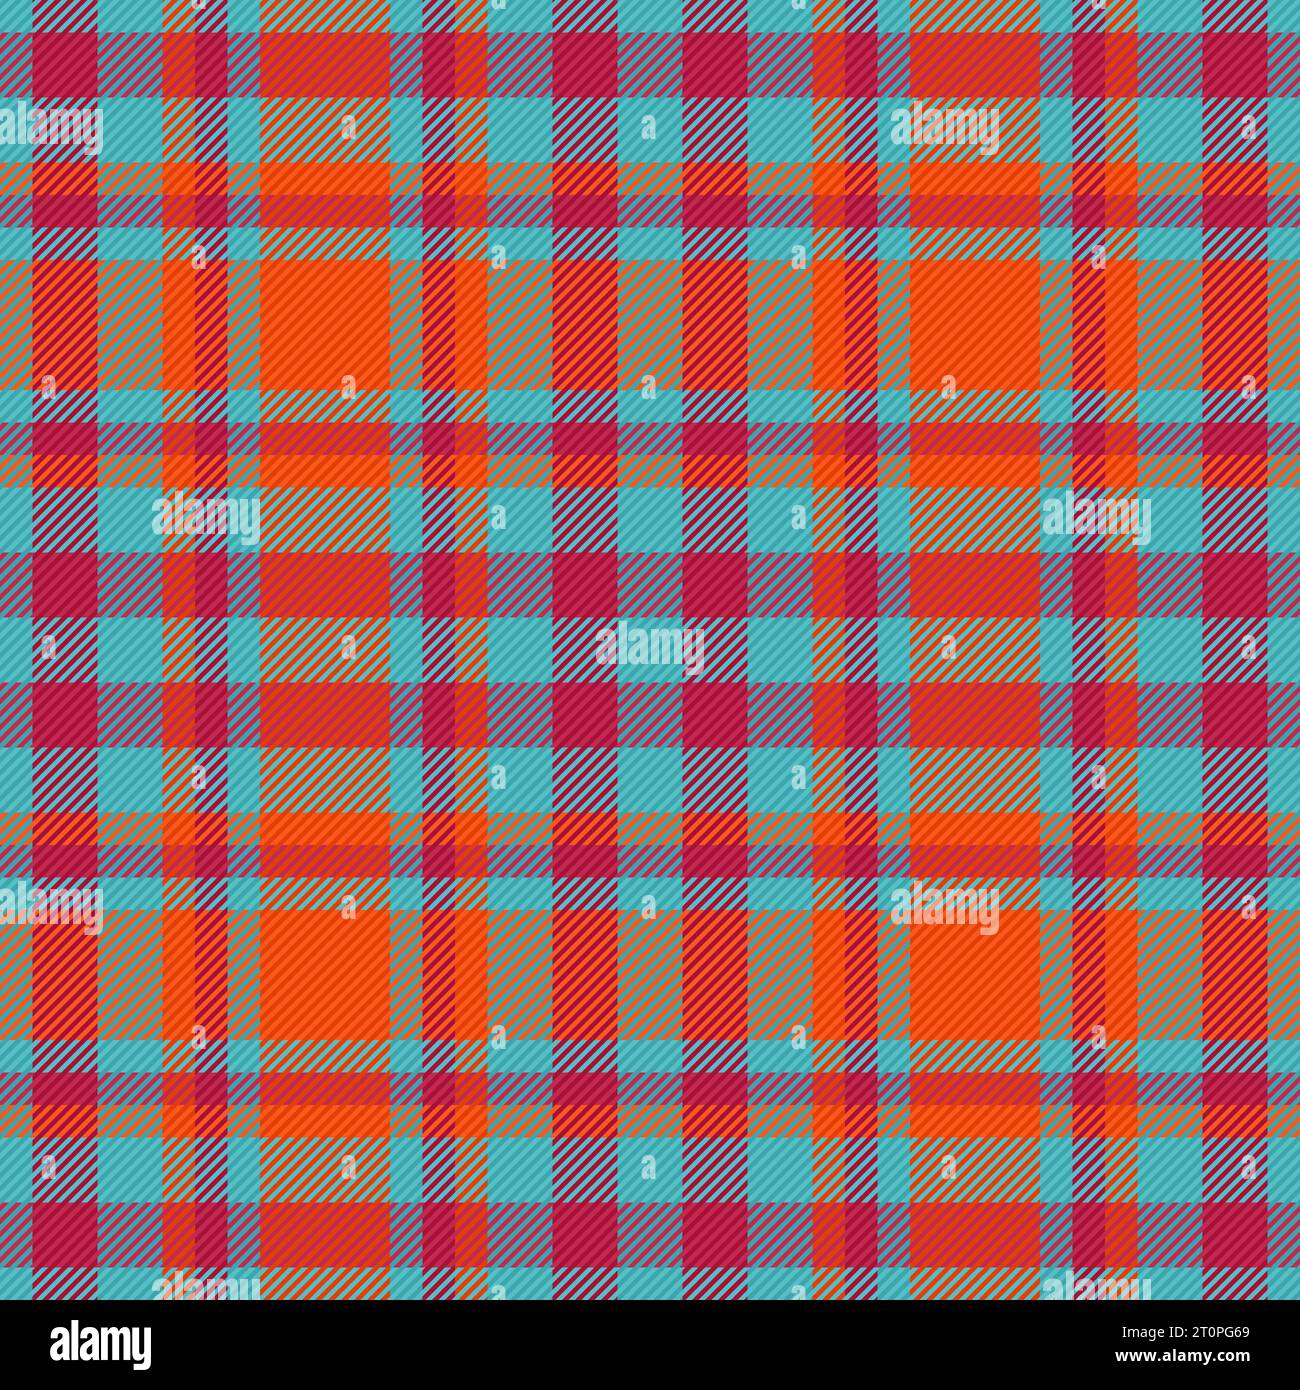 Texture vector fabric of background plaid pattern with a tartan check seamless textile in red and cyan colors. Stock Vector